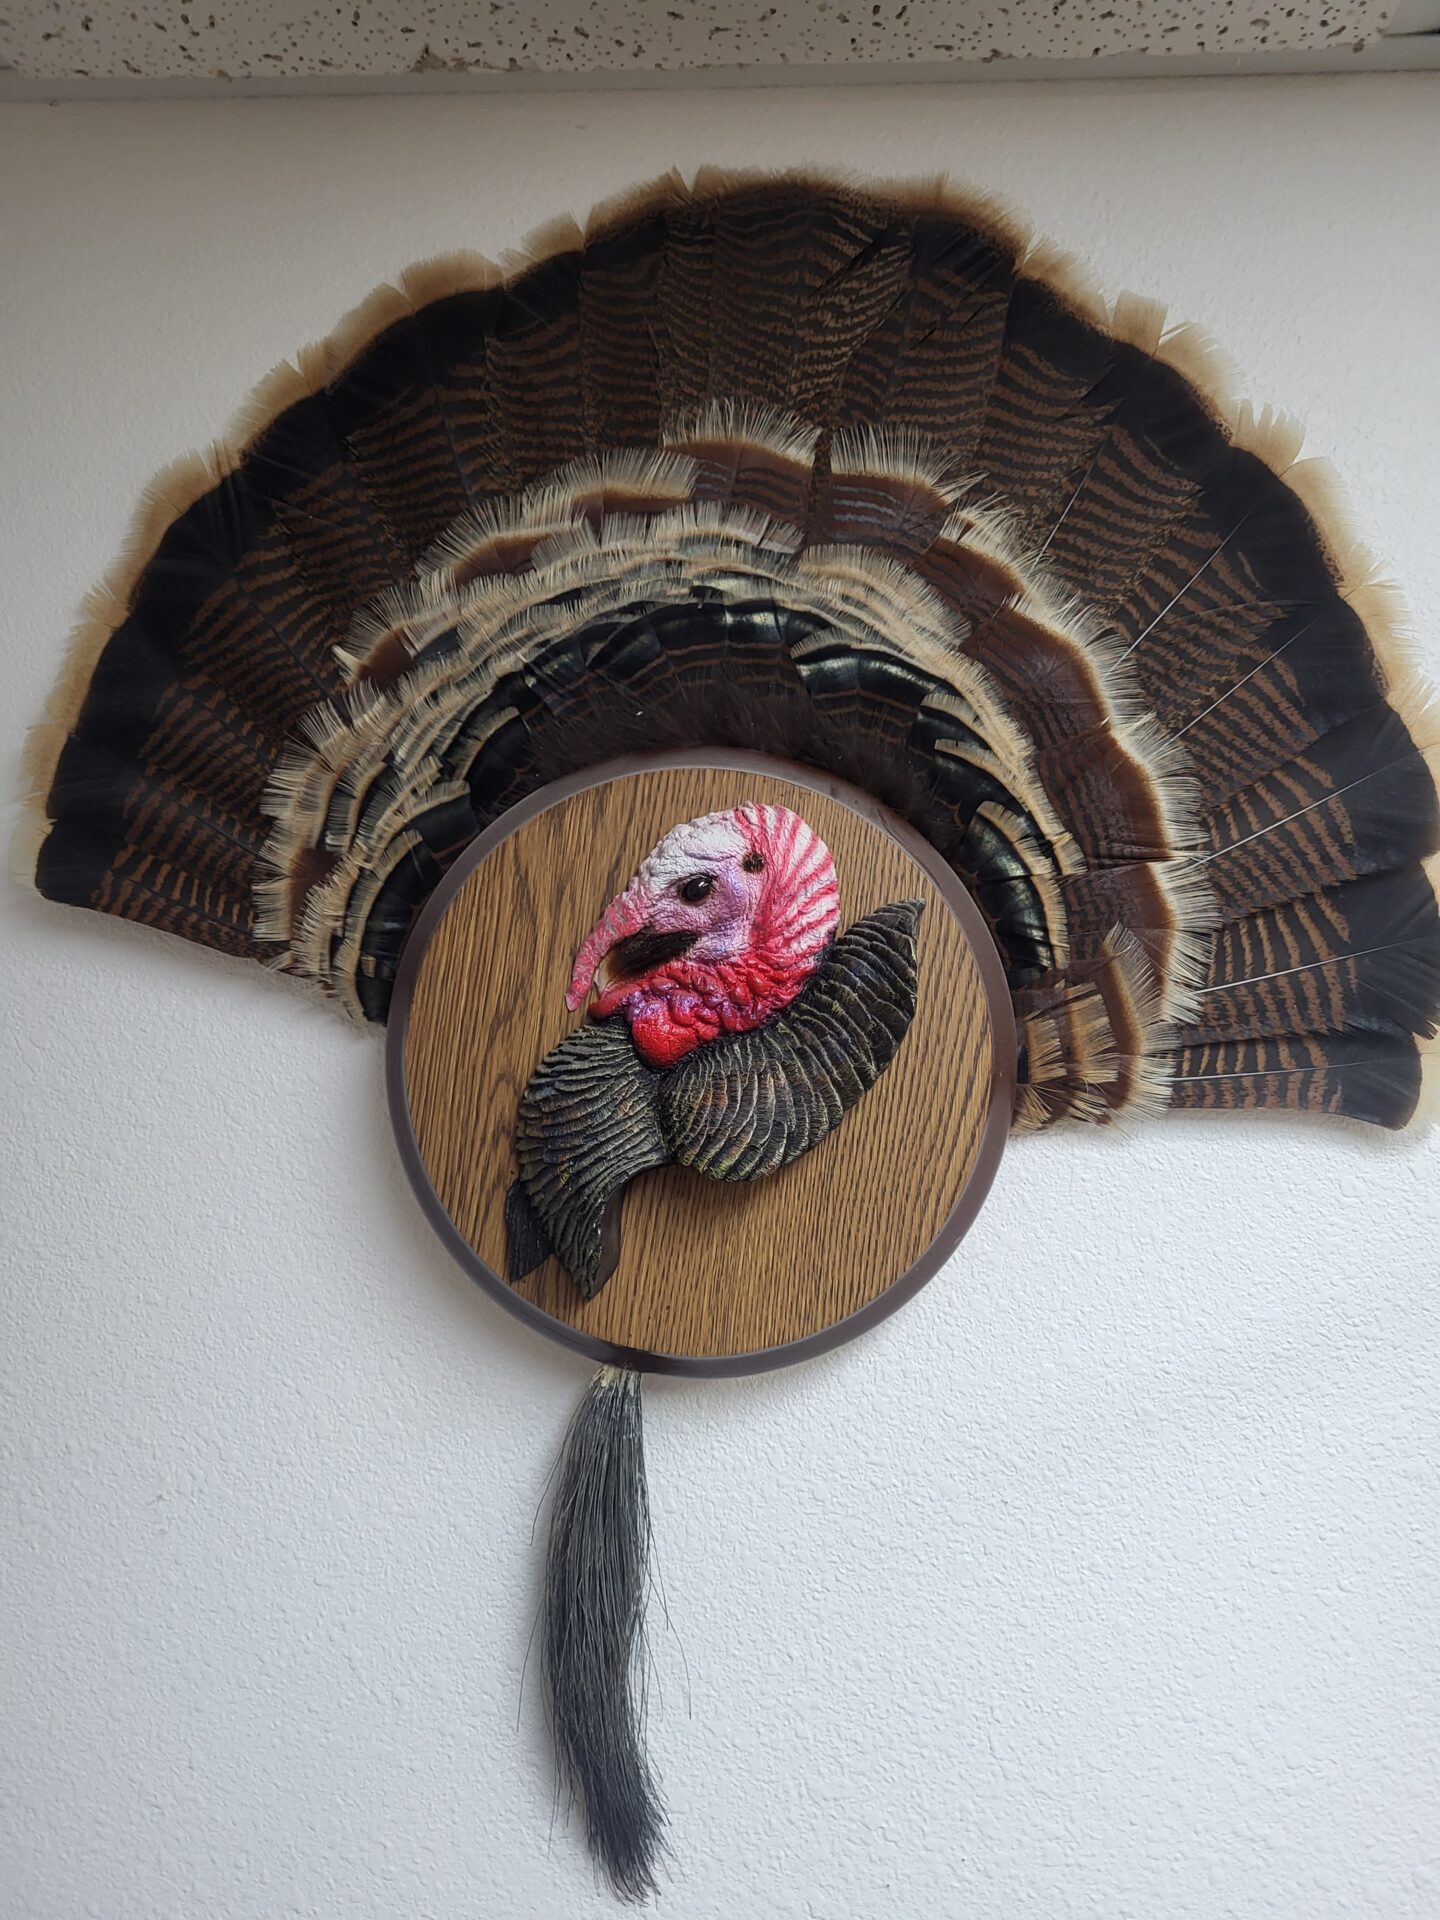 A beautifully created turkey taxidermy available for sale